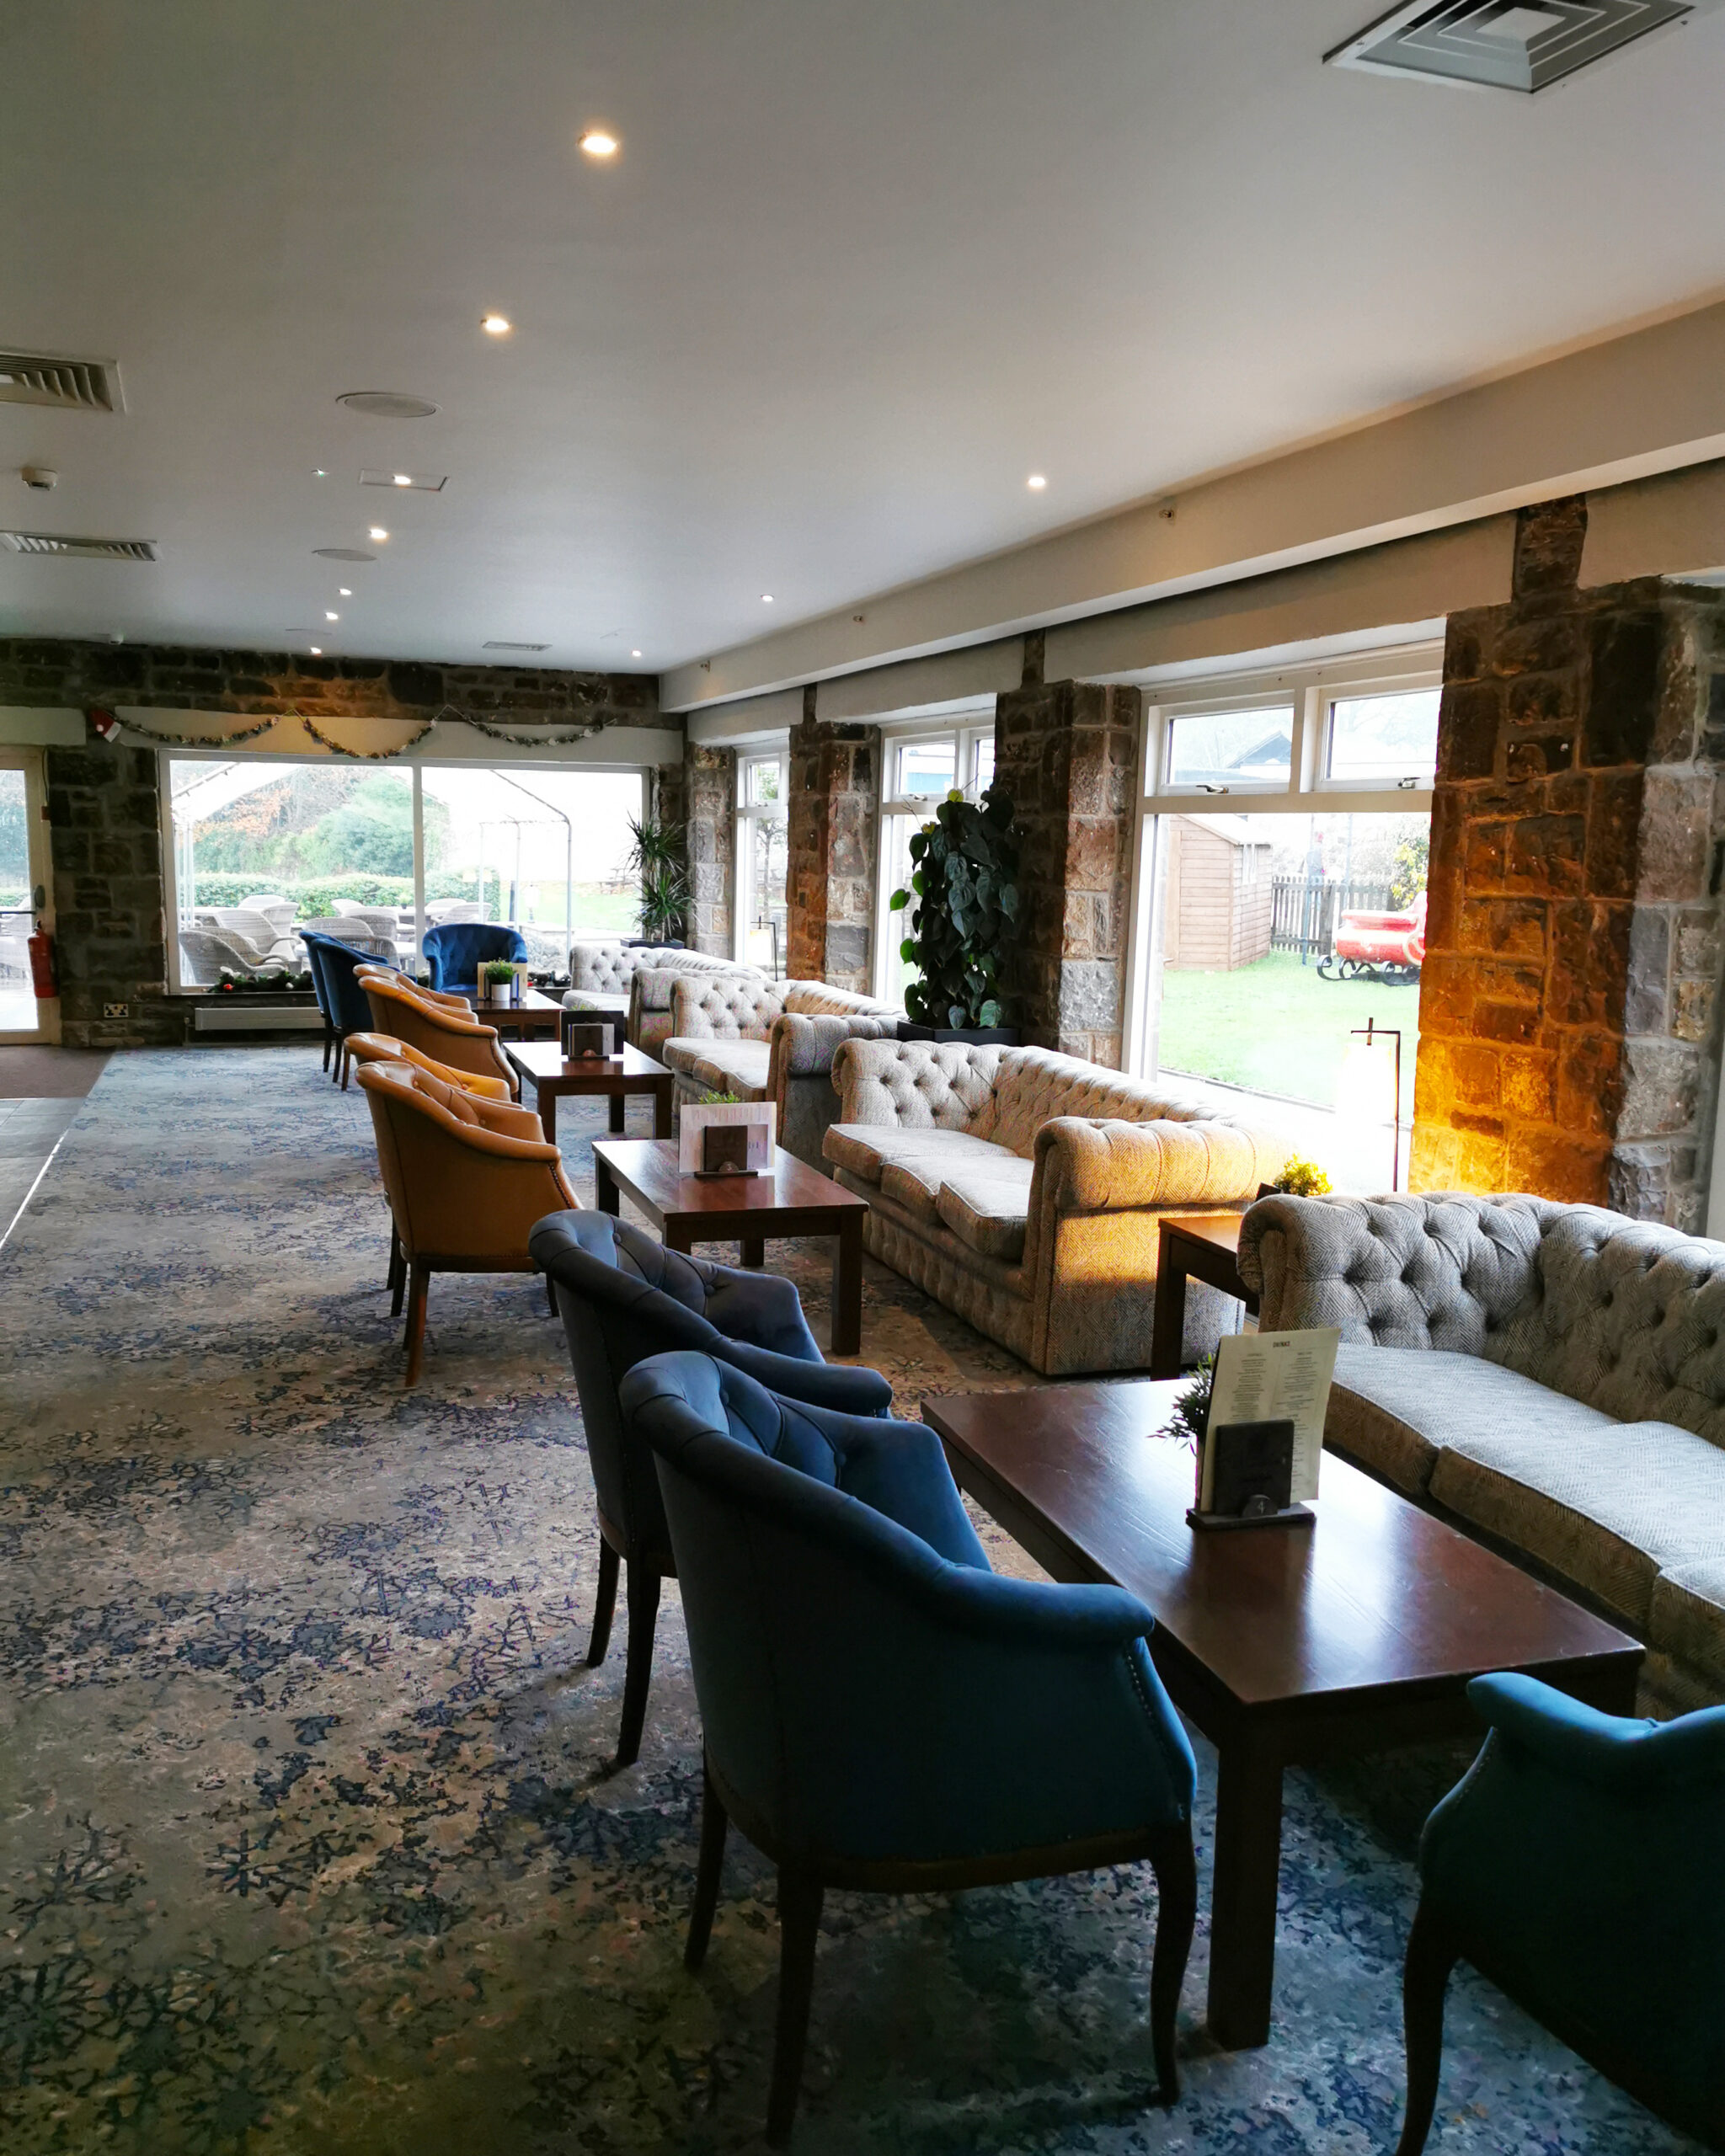  St. Pierre Marriott Hotel & Country Club, Delta Hotels, Marriott Hotel, Chepstow, Hotel & spa, Family-friendly, Welsh Hotel, South Wales, Hotel Review, the Frenchie Mummy, Country Club & spa